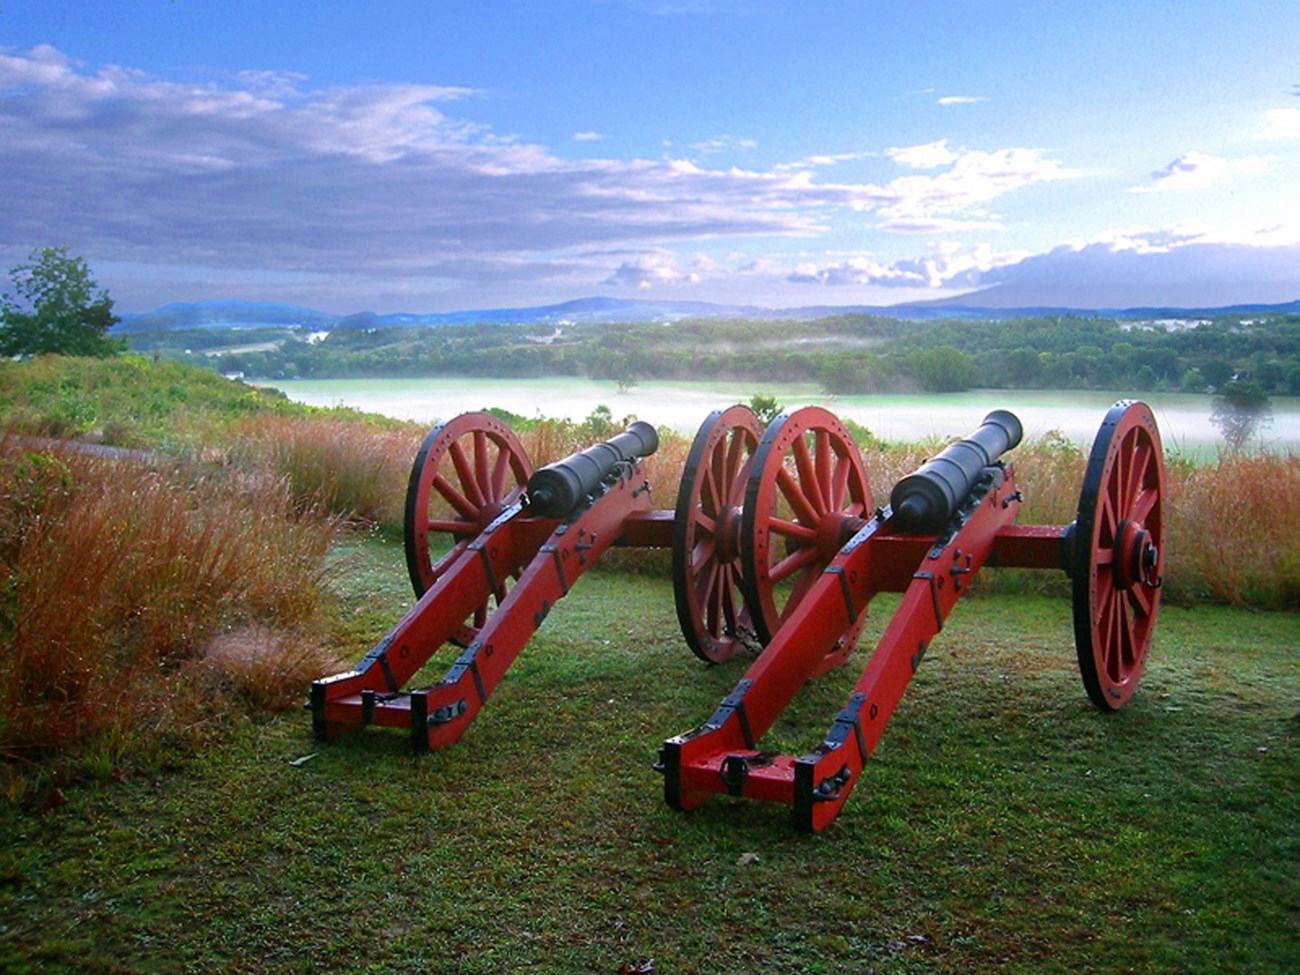 Two Red canons overlooking a misty hudson river valley